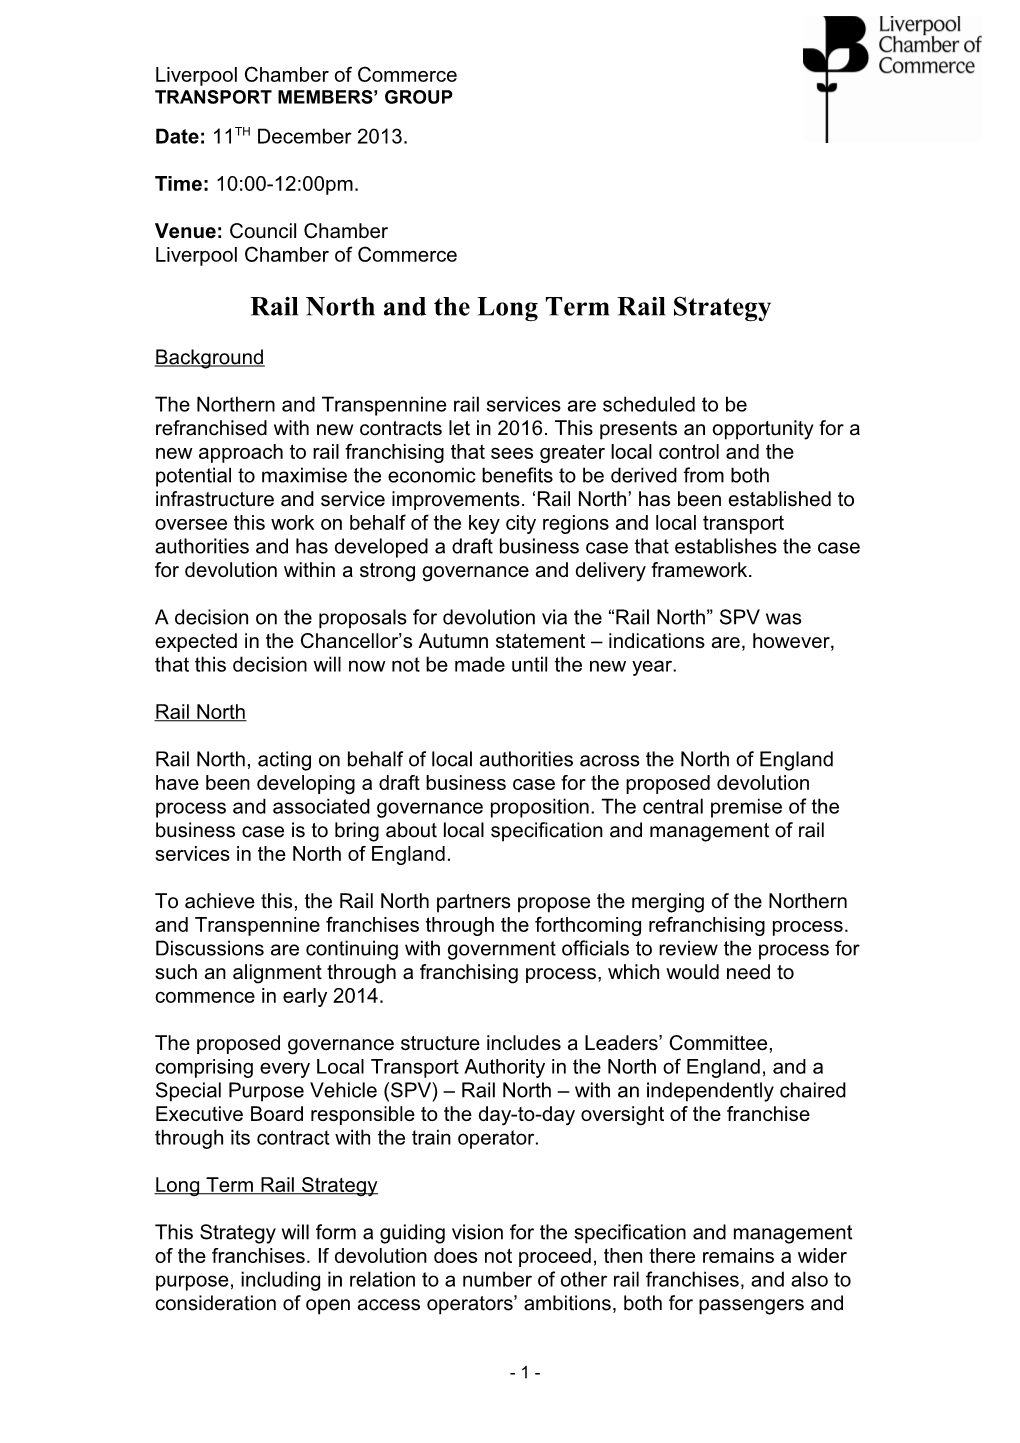 Rail North and the Long Term Rail Strategy